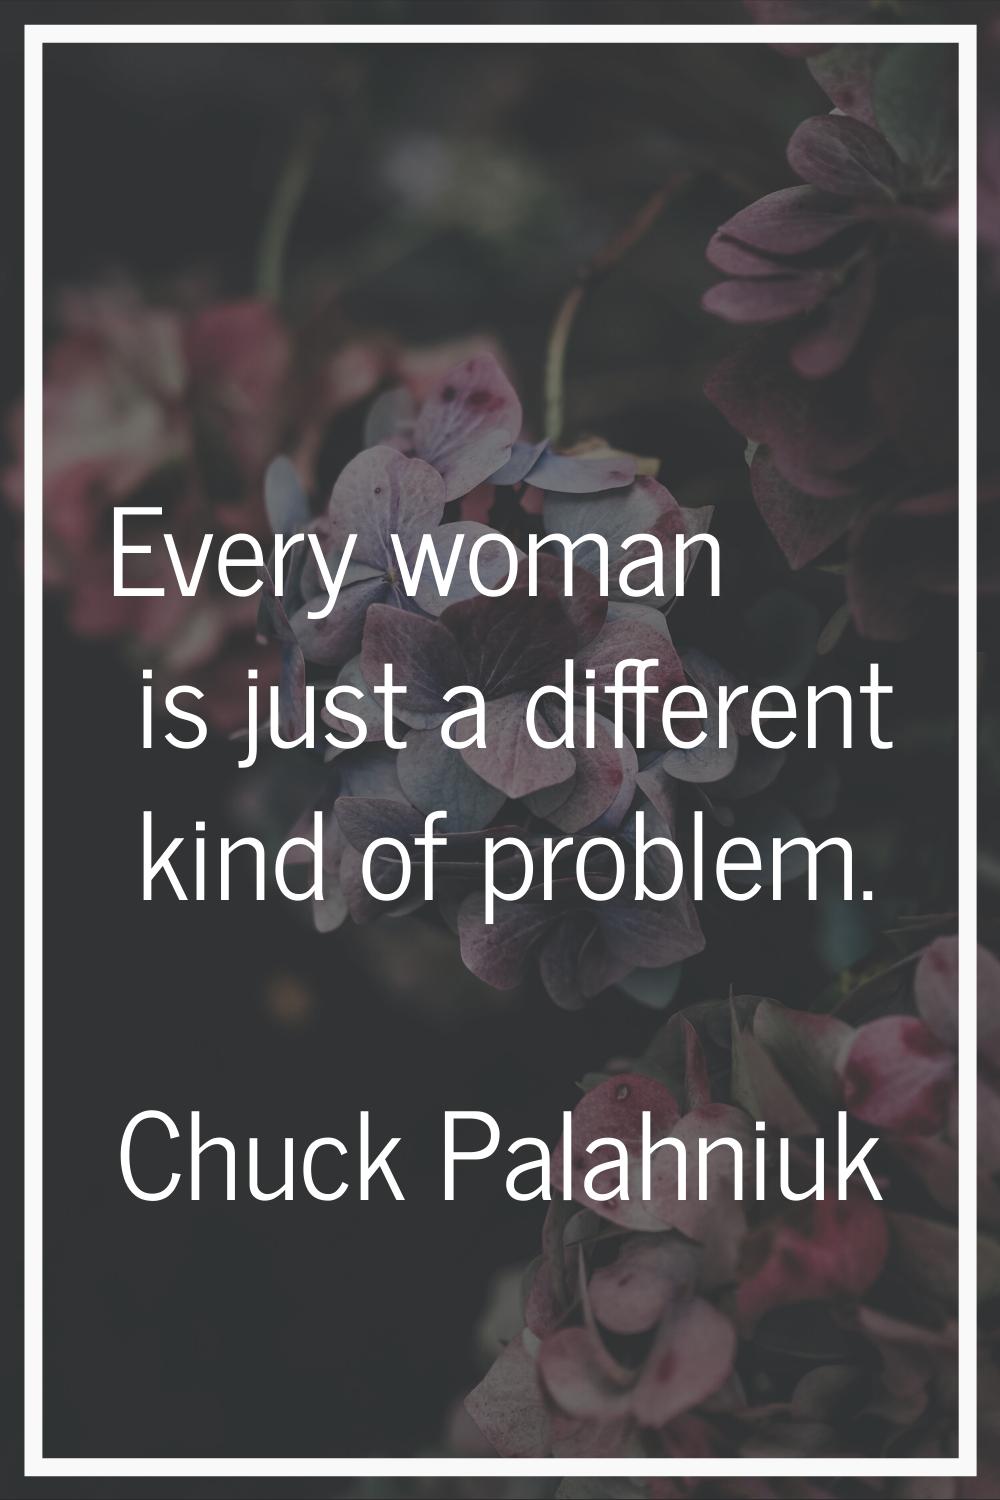 Every woman is just a different kind of problem.